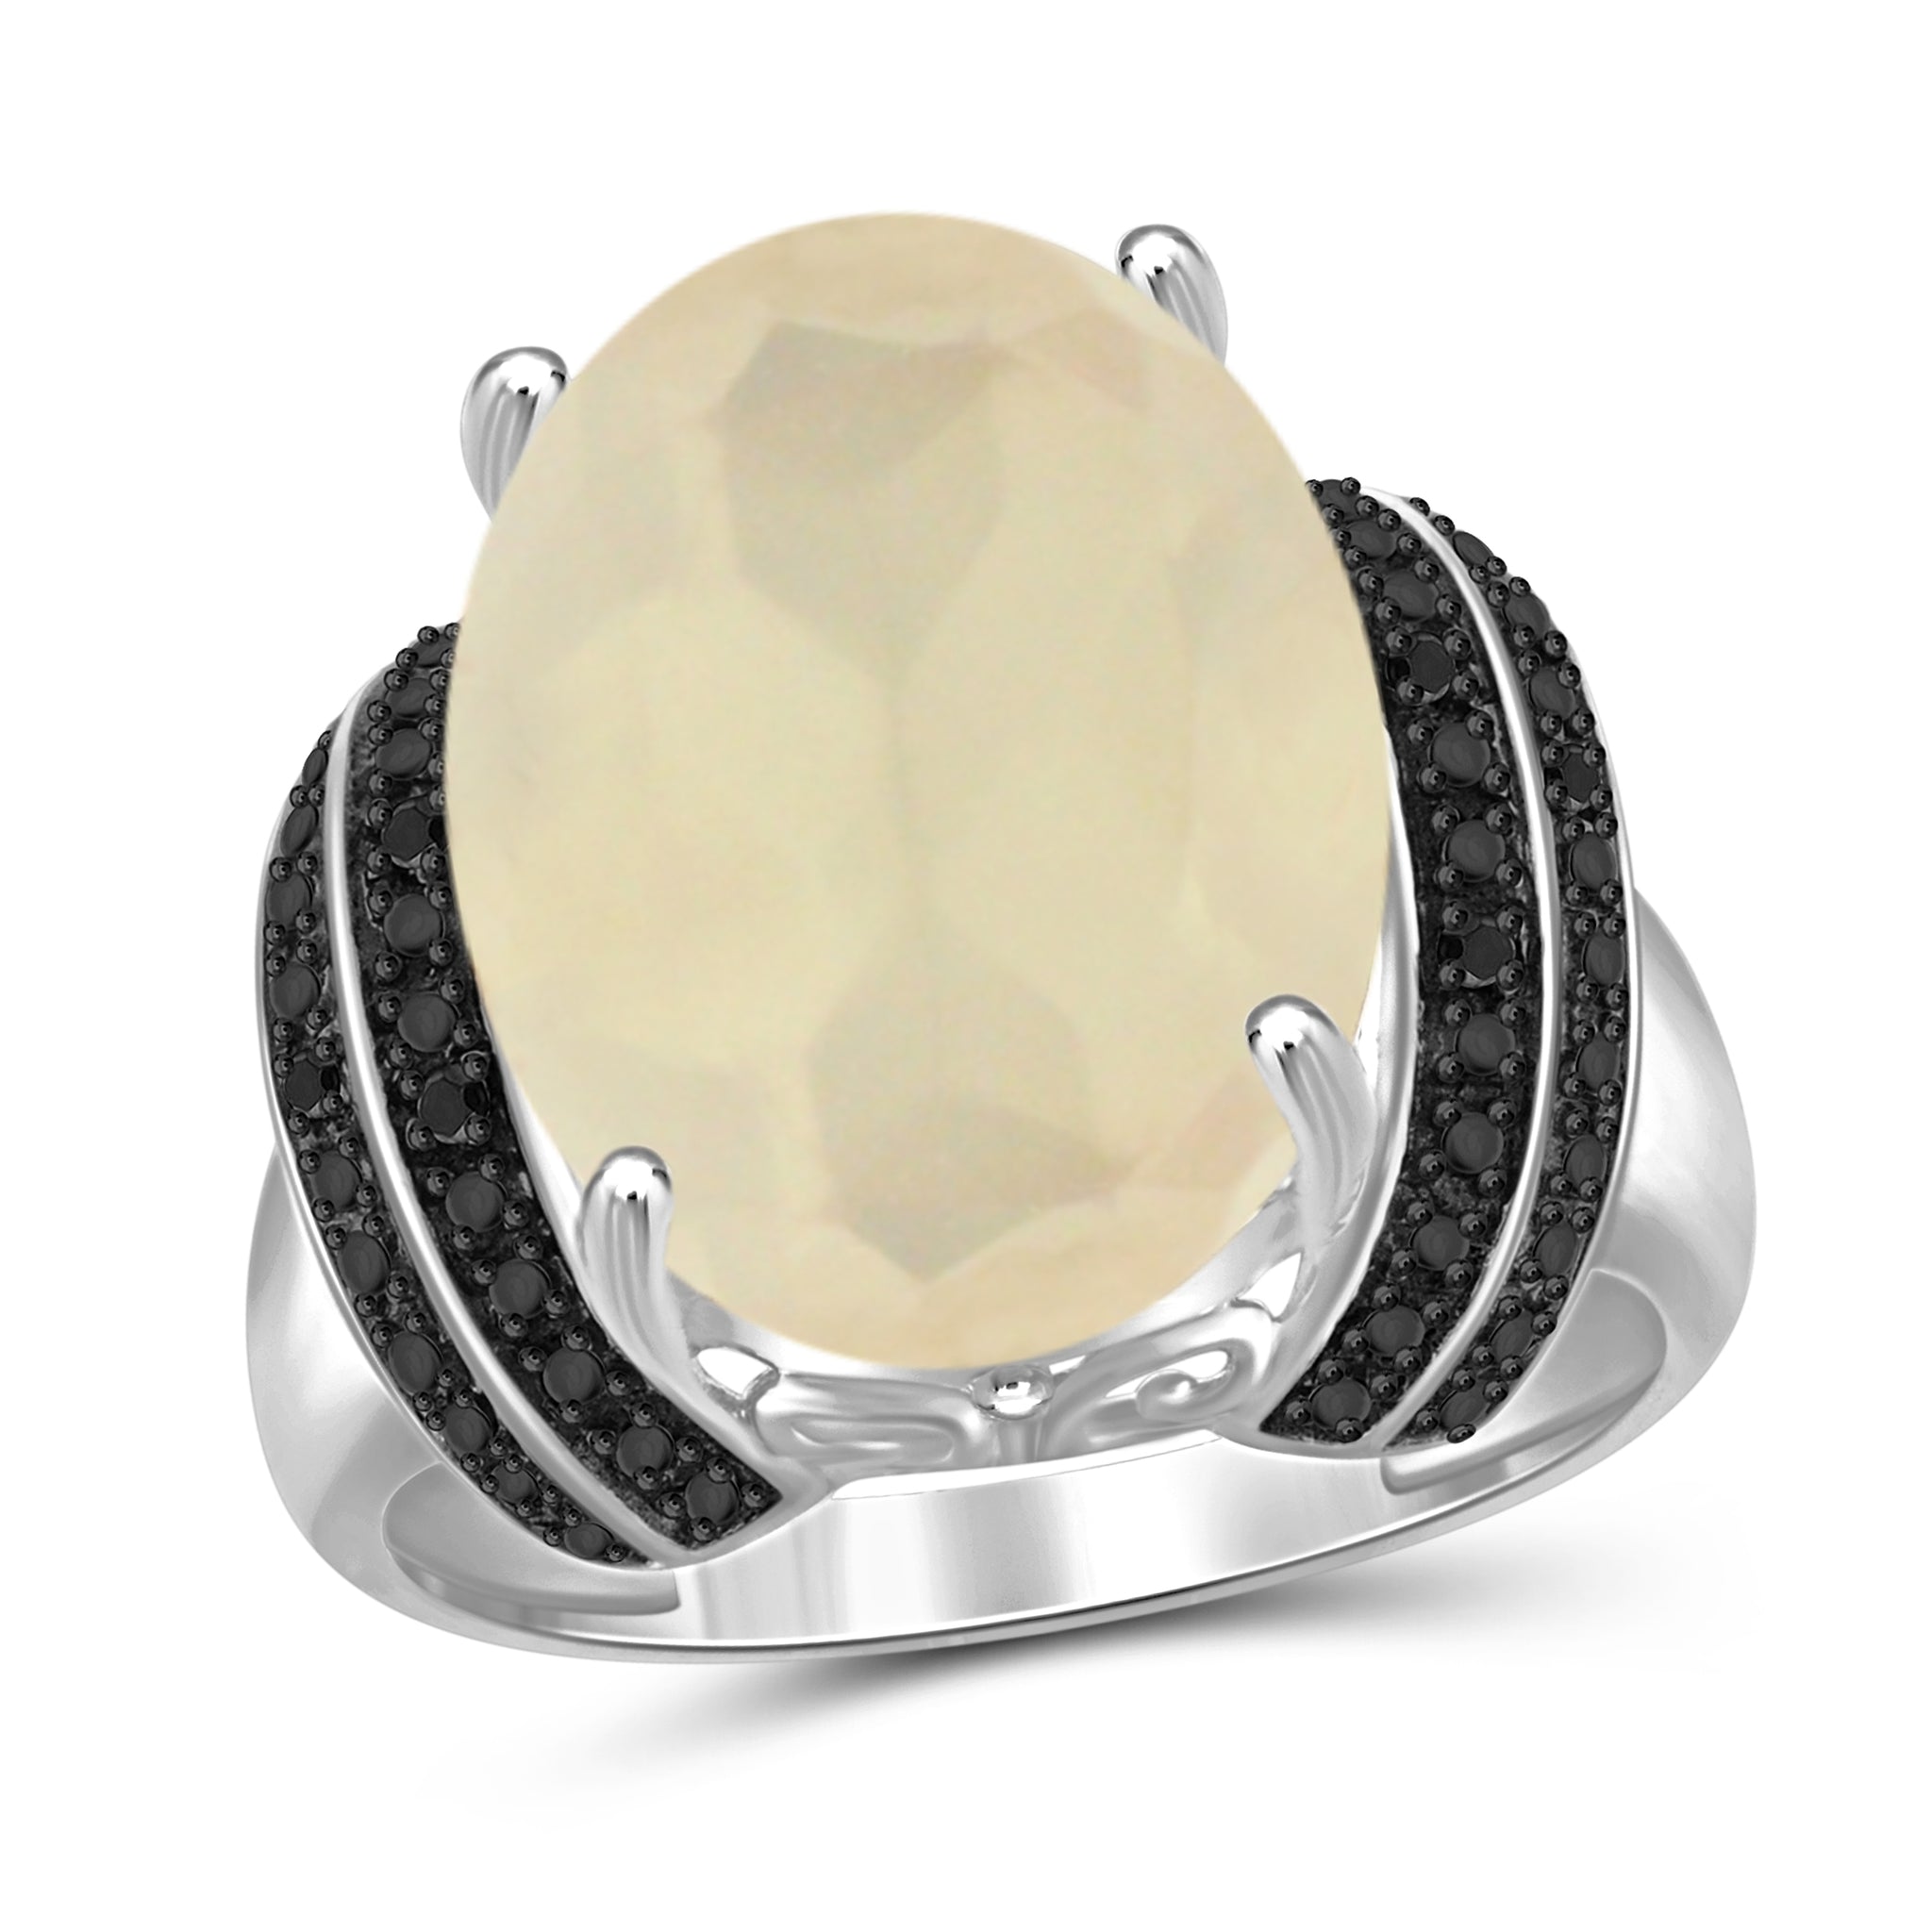 JewelonFire 8 1/4 Carat T.G.W. Moon and Black Diamond Accent Sterling Silver Ring